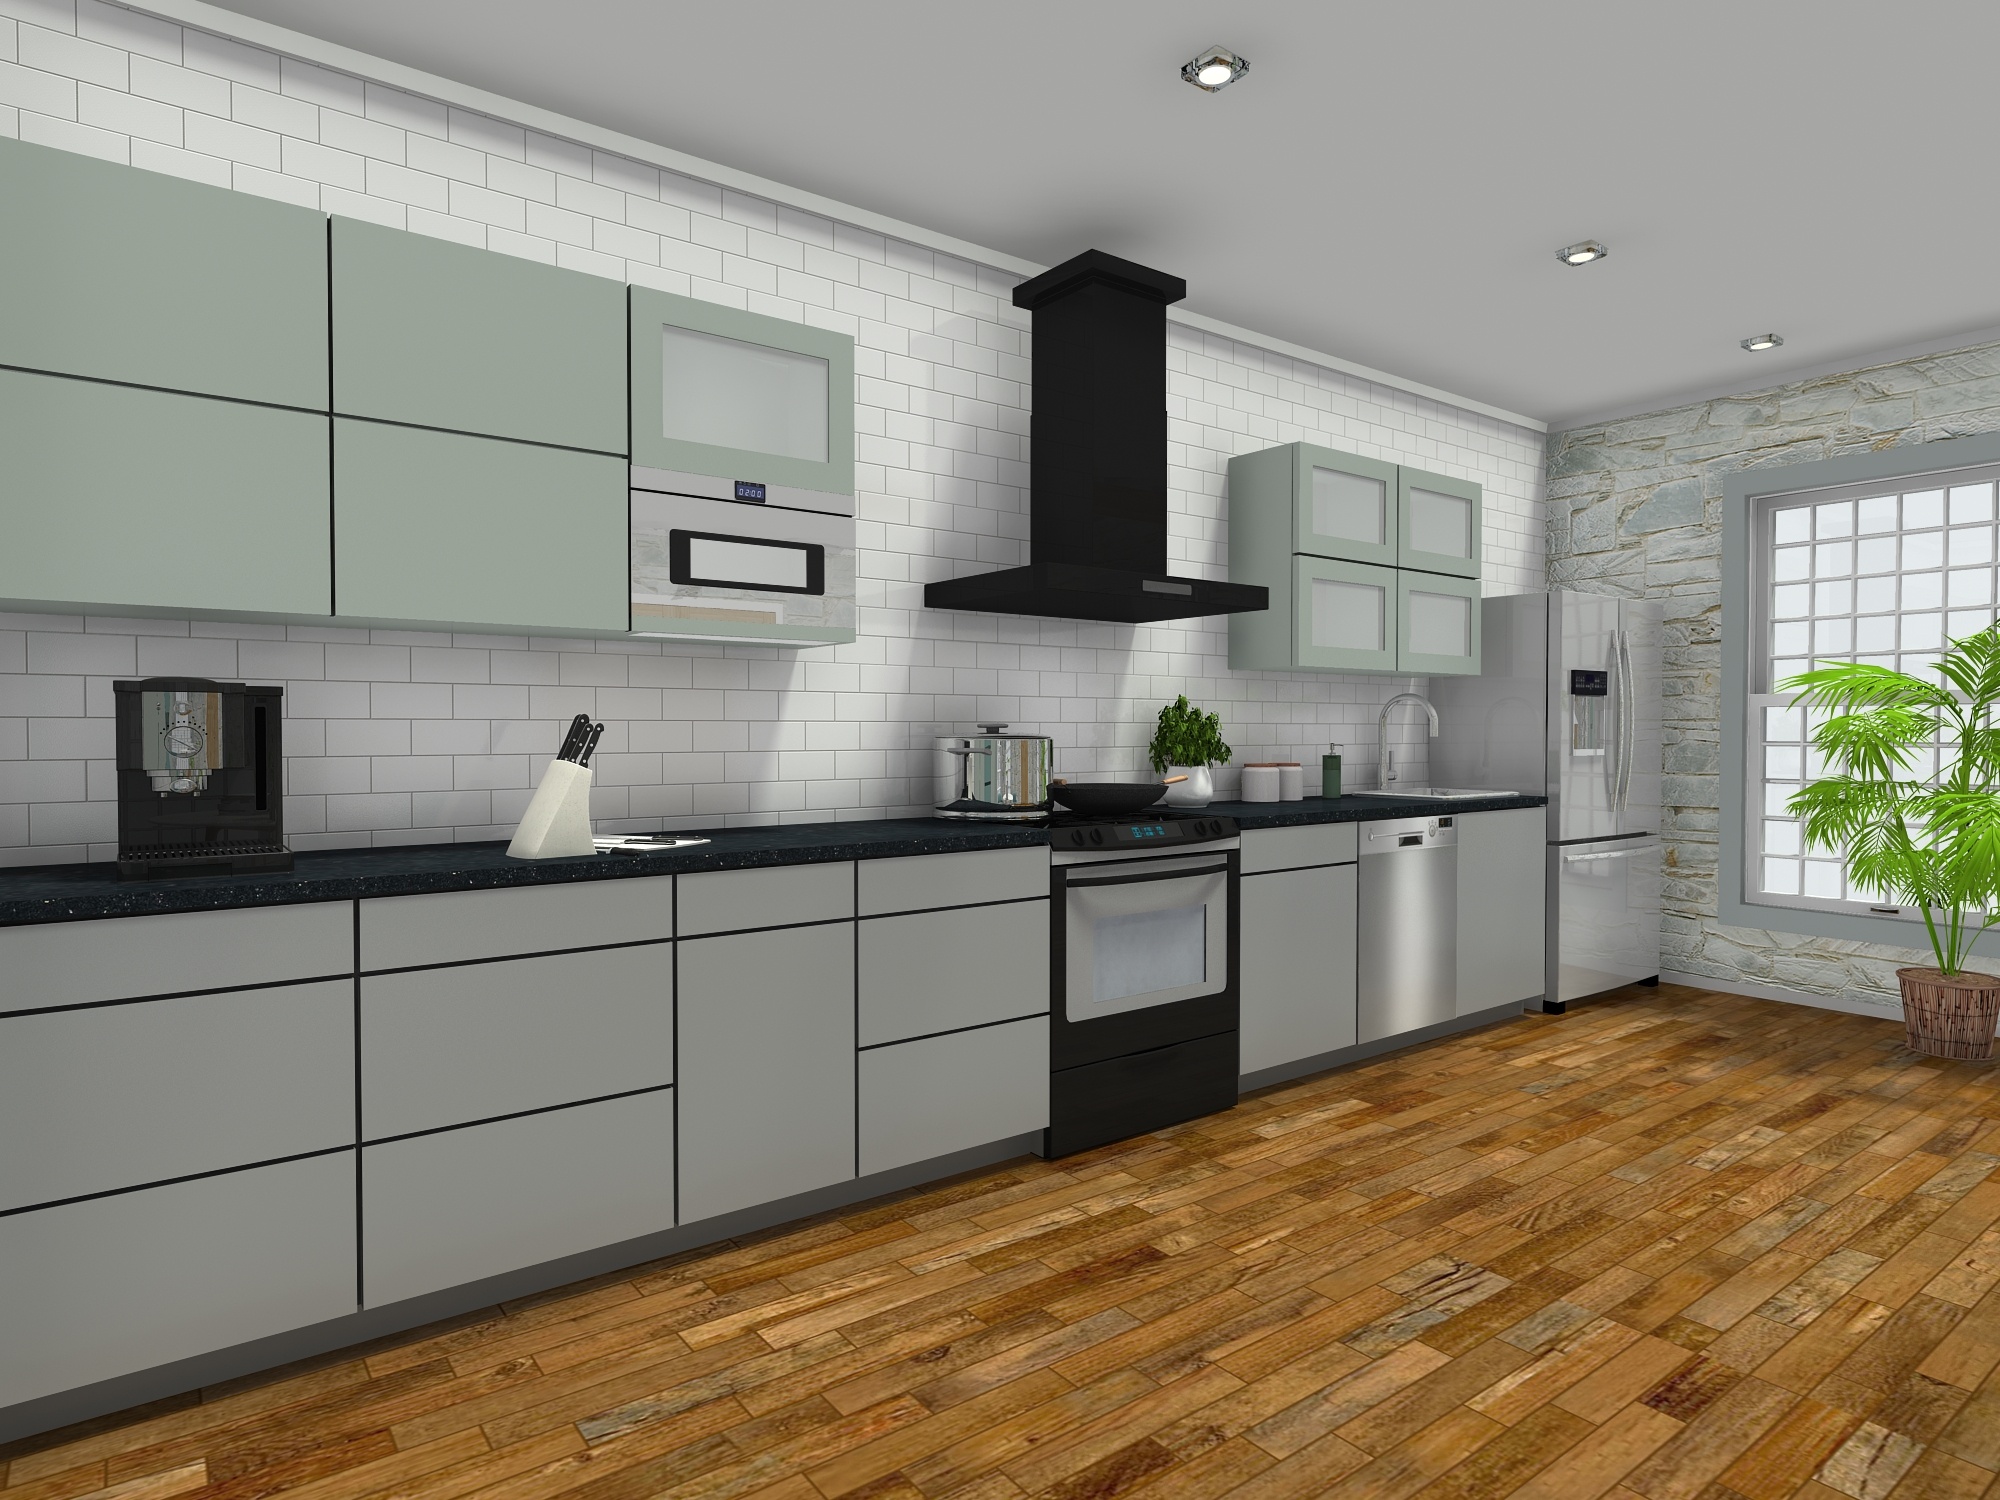 How to Design a Kitchen – RoomSketcher Help Center